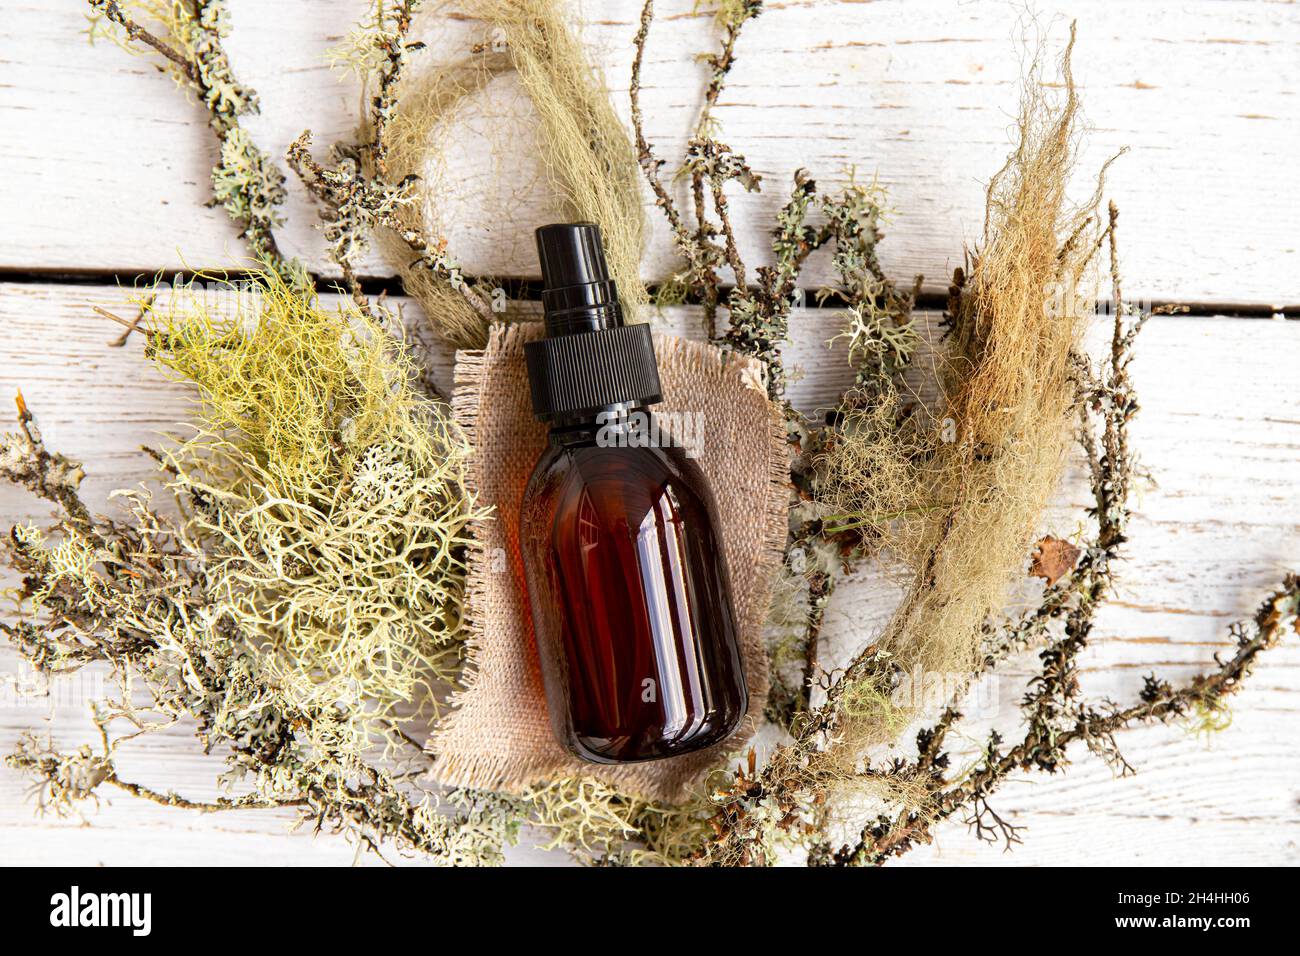 Brown pipette bottle with herbal lichen medicine tincture inside concept. Usnea barbata or old man's beard or beard lichen tincture concept. Flat lay. Stock Photo